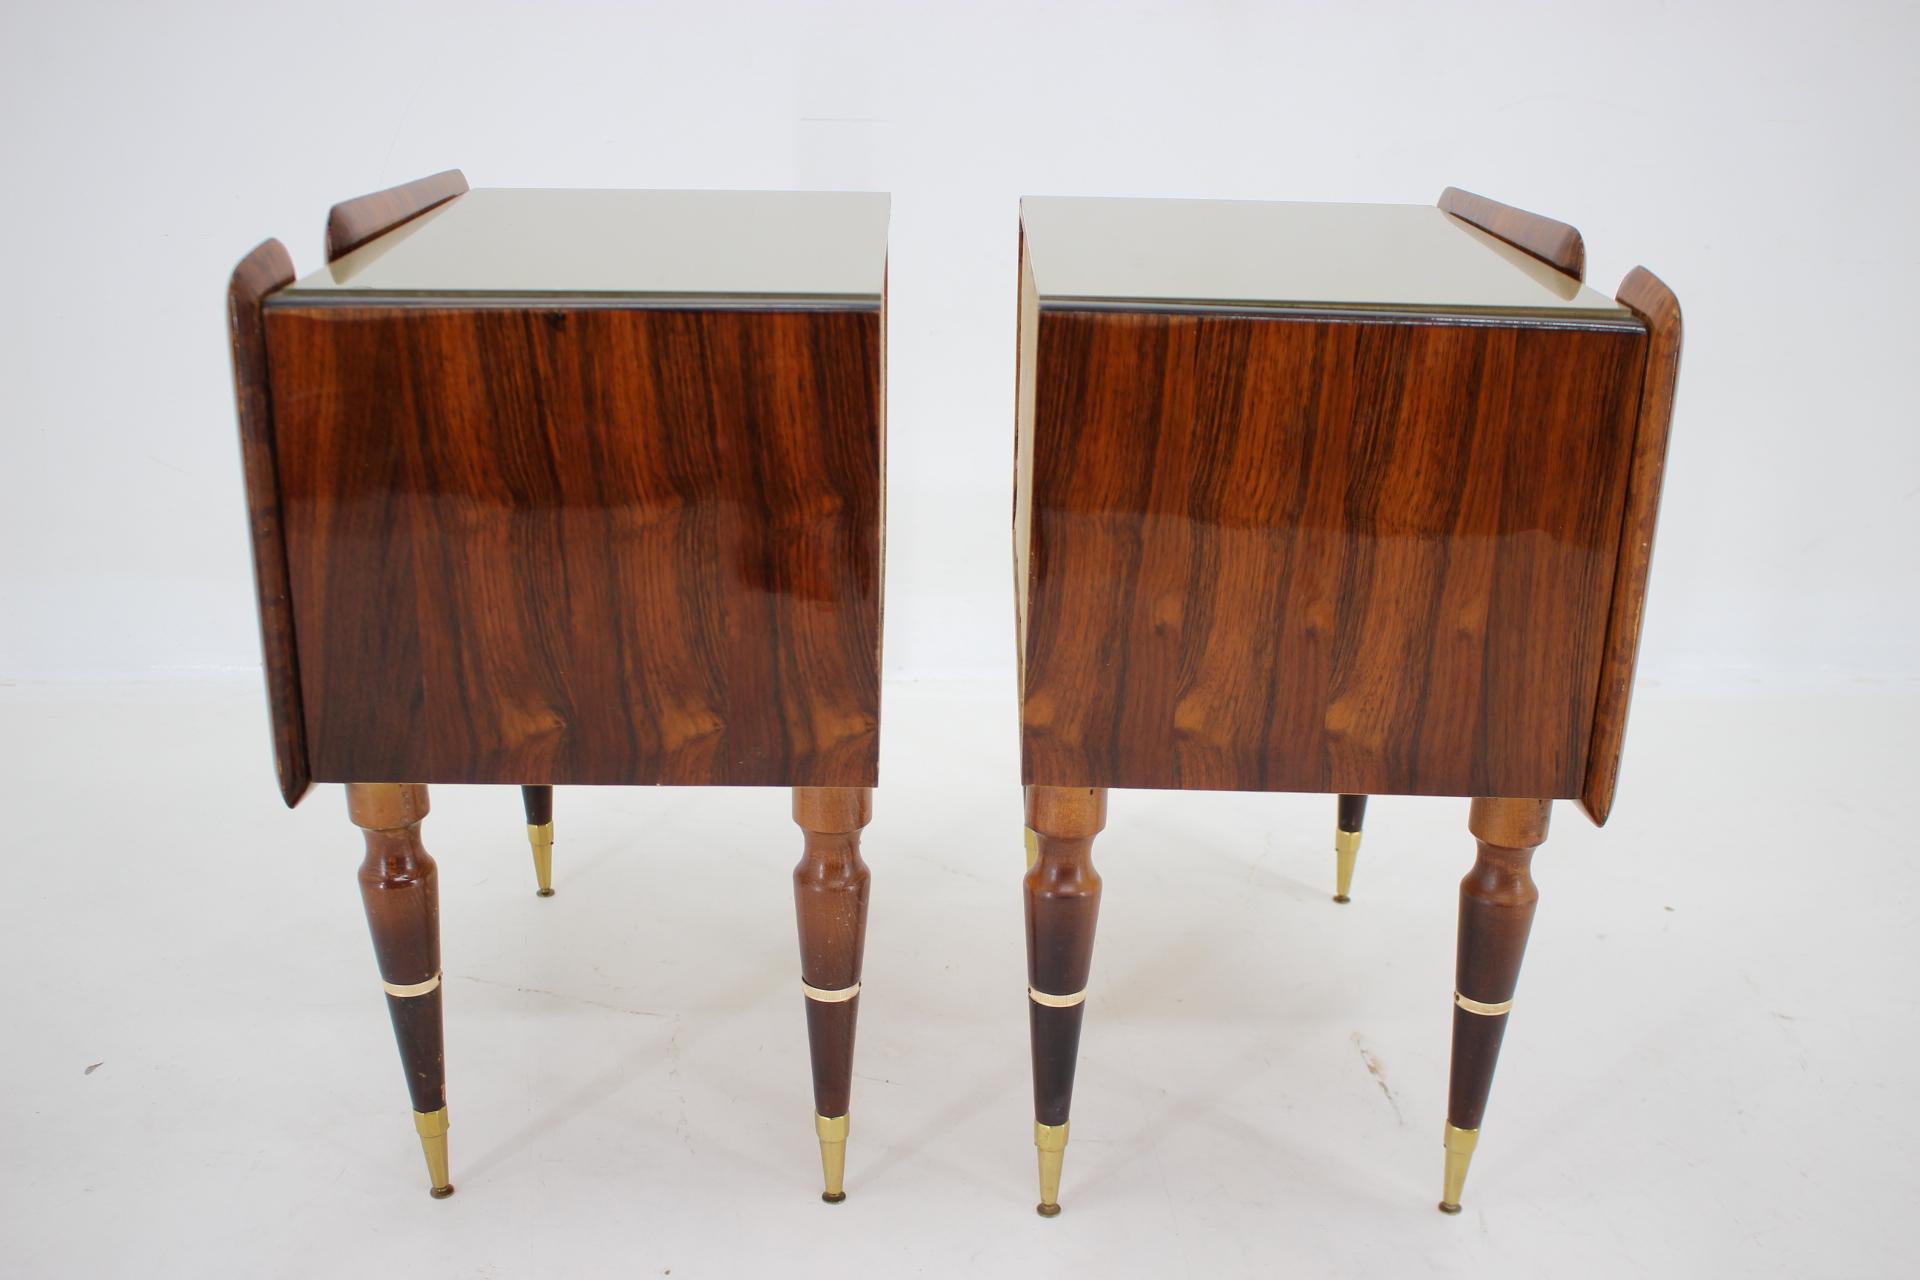 1960s Pair of Sculptural Wooden Bedside Tables, Italy For Sale 2